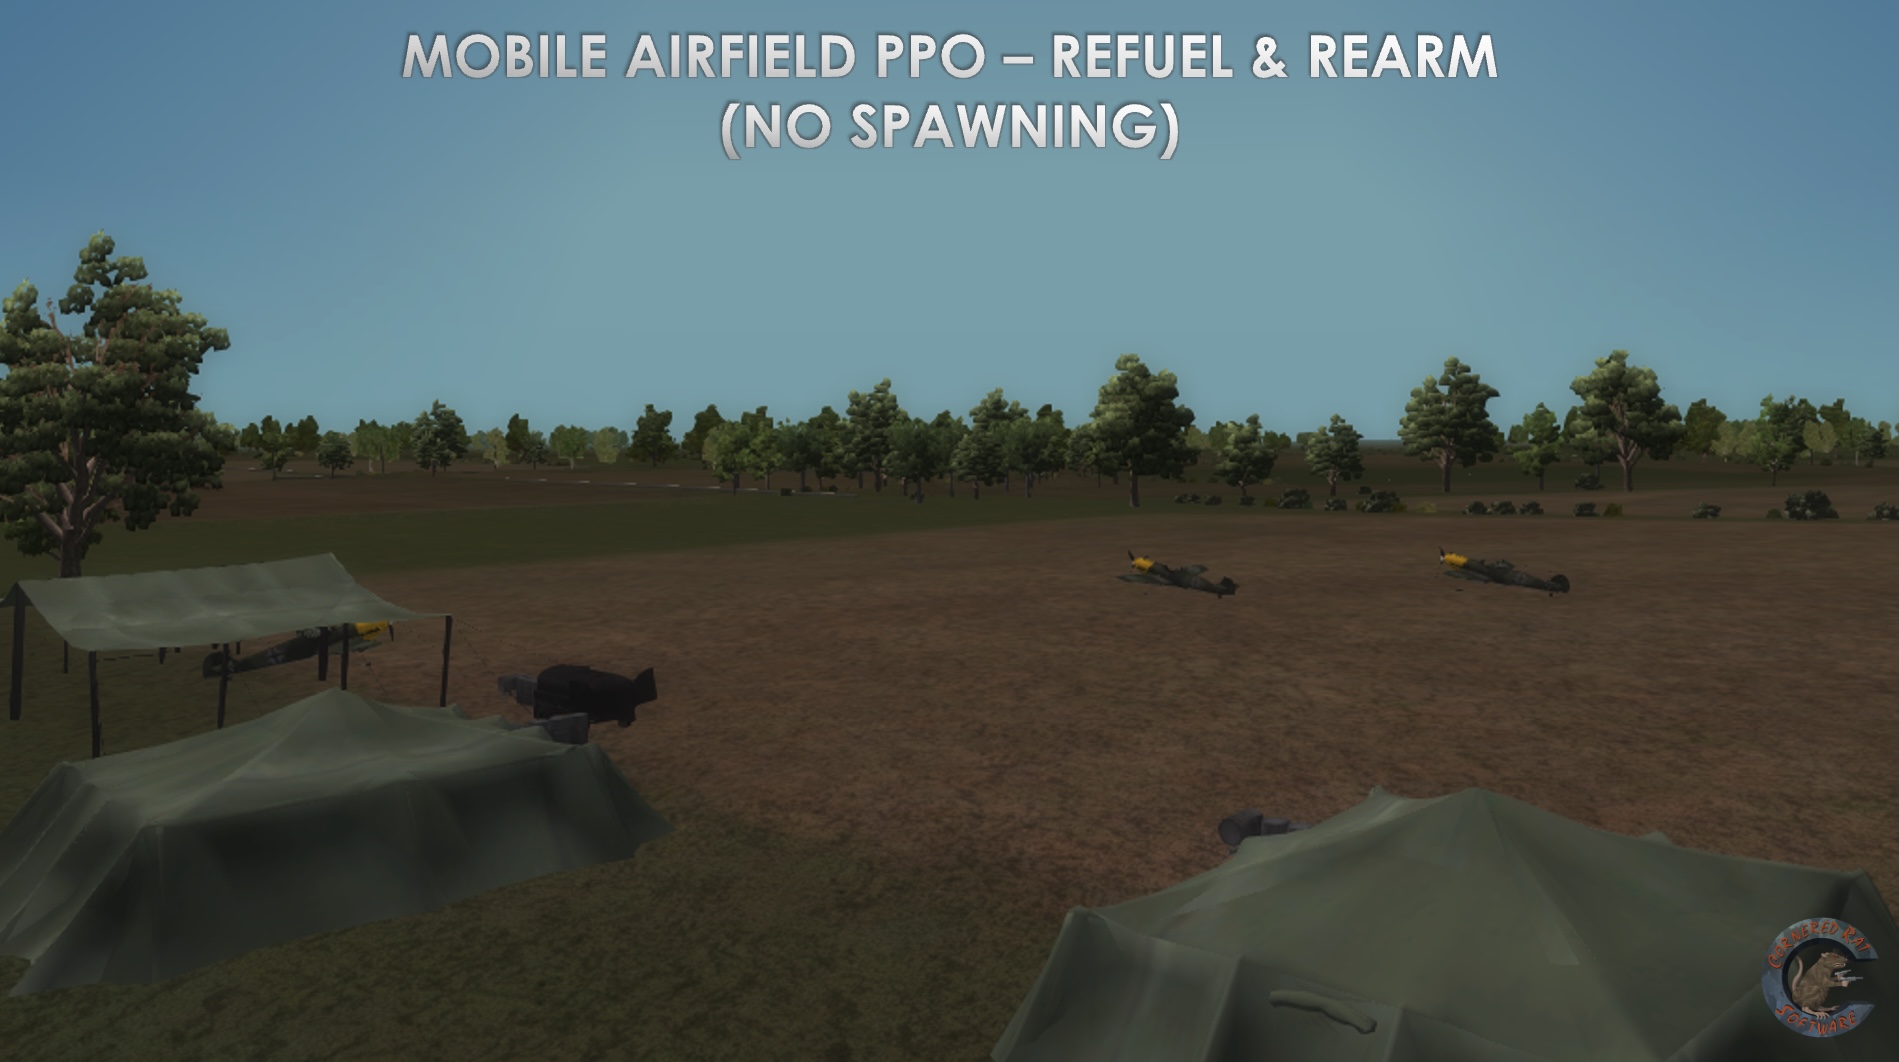 Mobile Airfield PPO